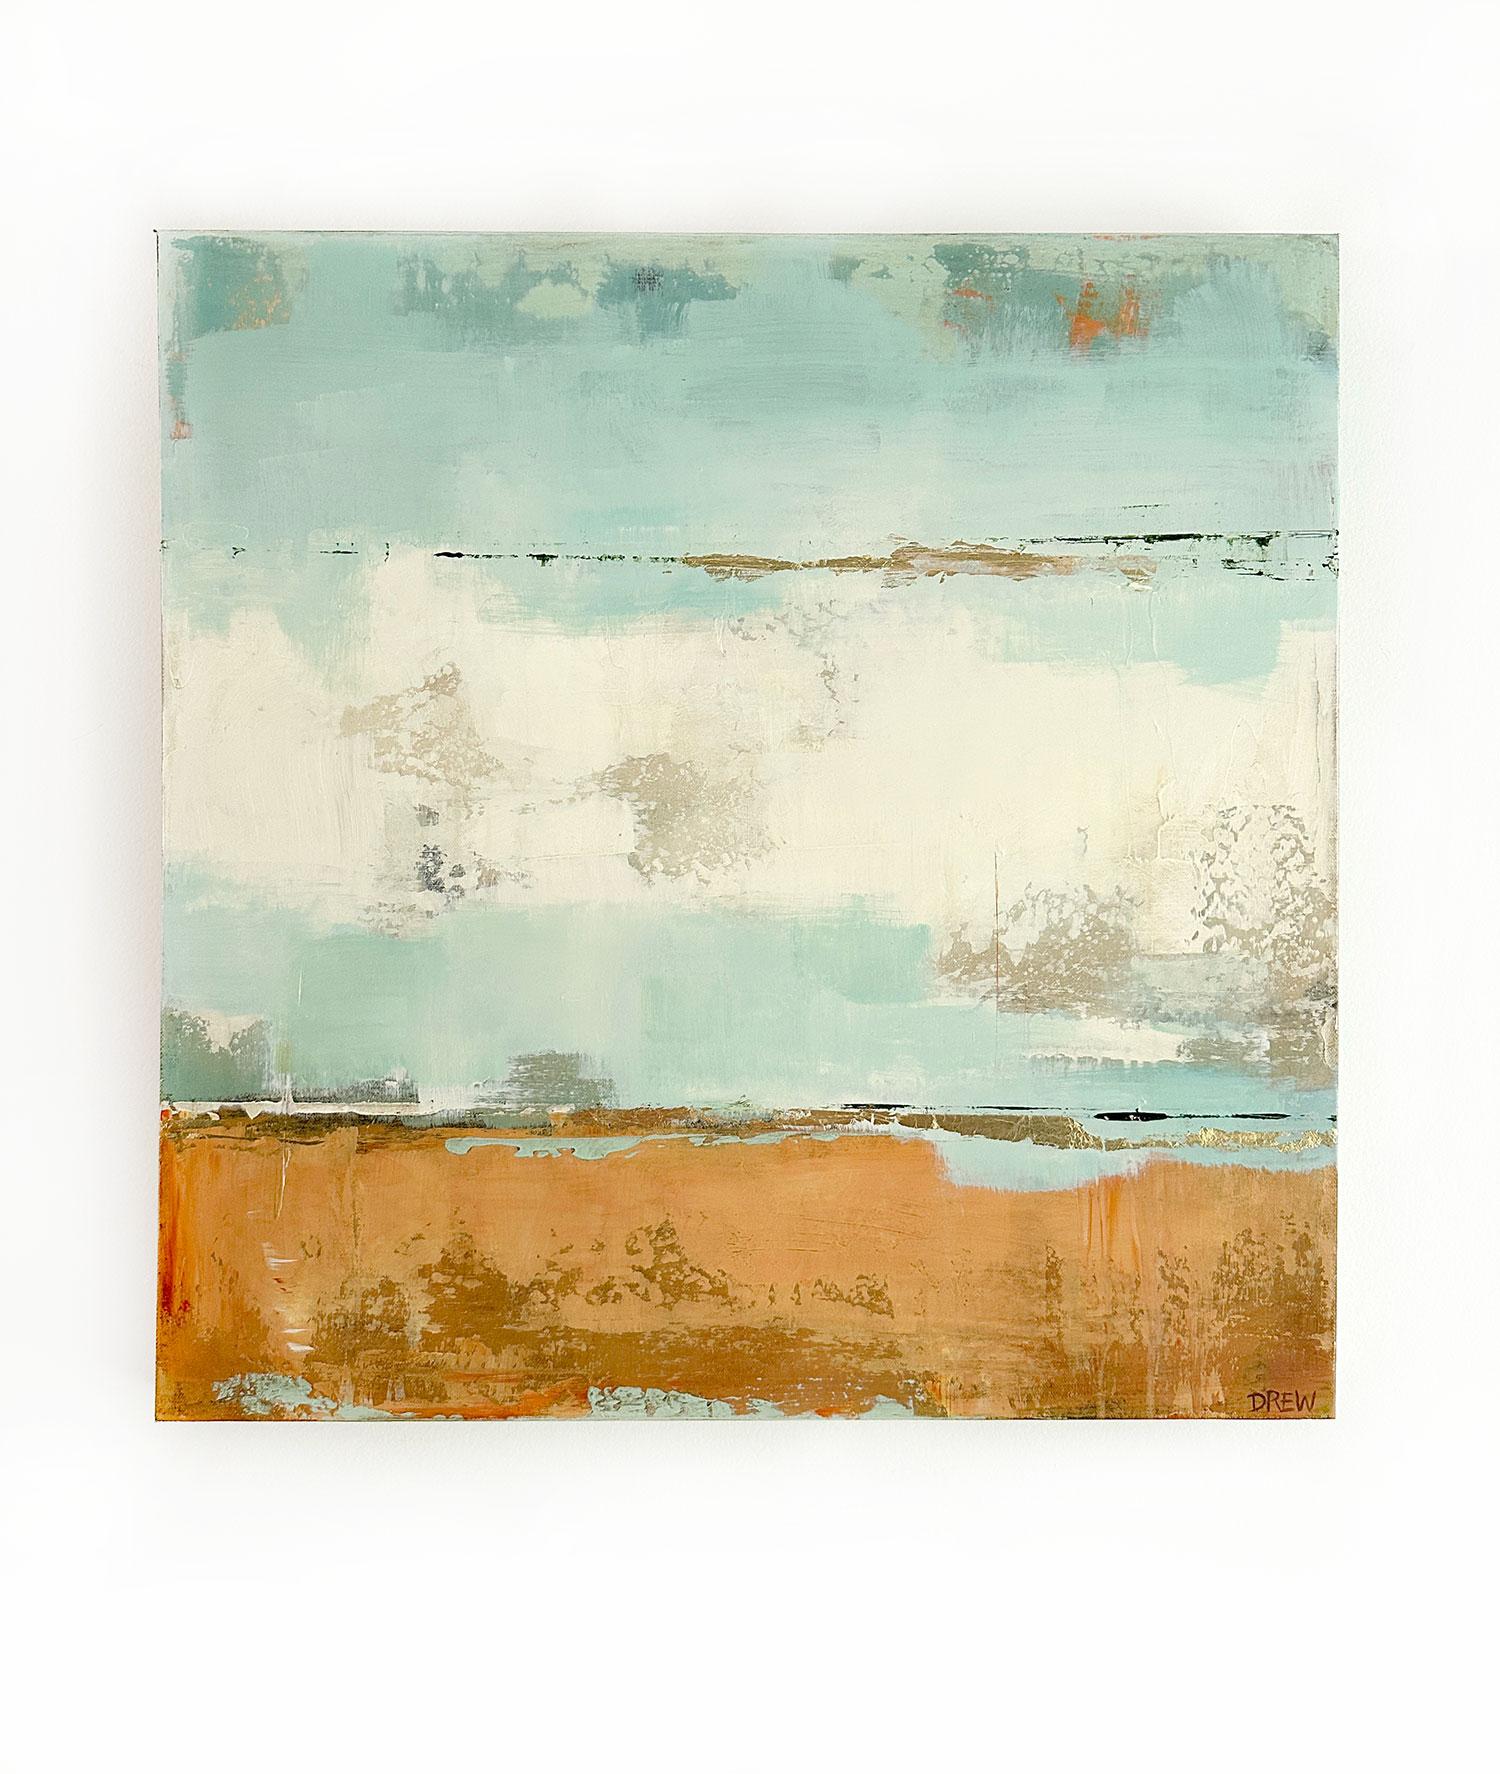 <p>Artist Comments<br>Artist Drew Noel Marin presents an atmospheric and moody abstract piece. She displays energetic sequences of color exuding peacefulness. The combination of using a brush and palette knife builds up the soothing overall vibe.